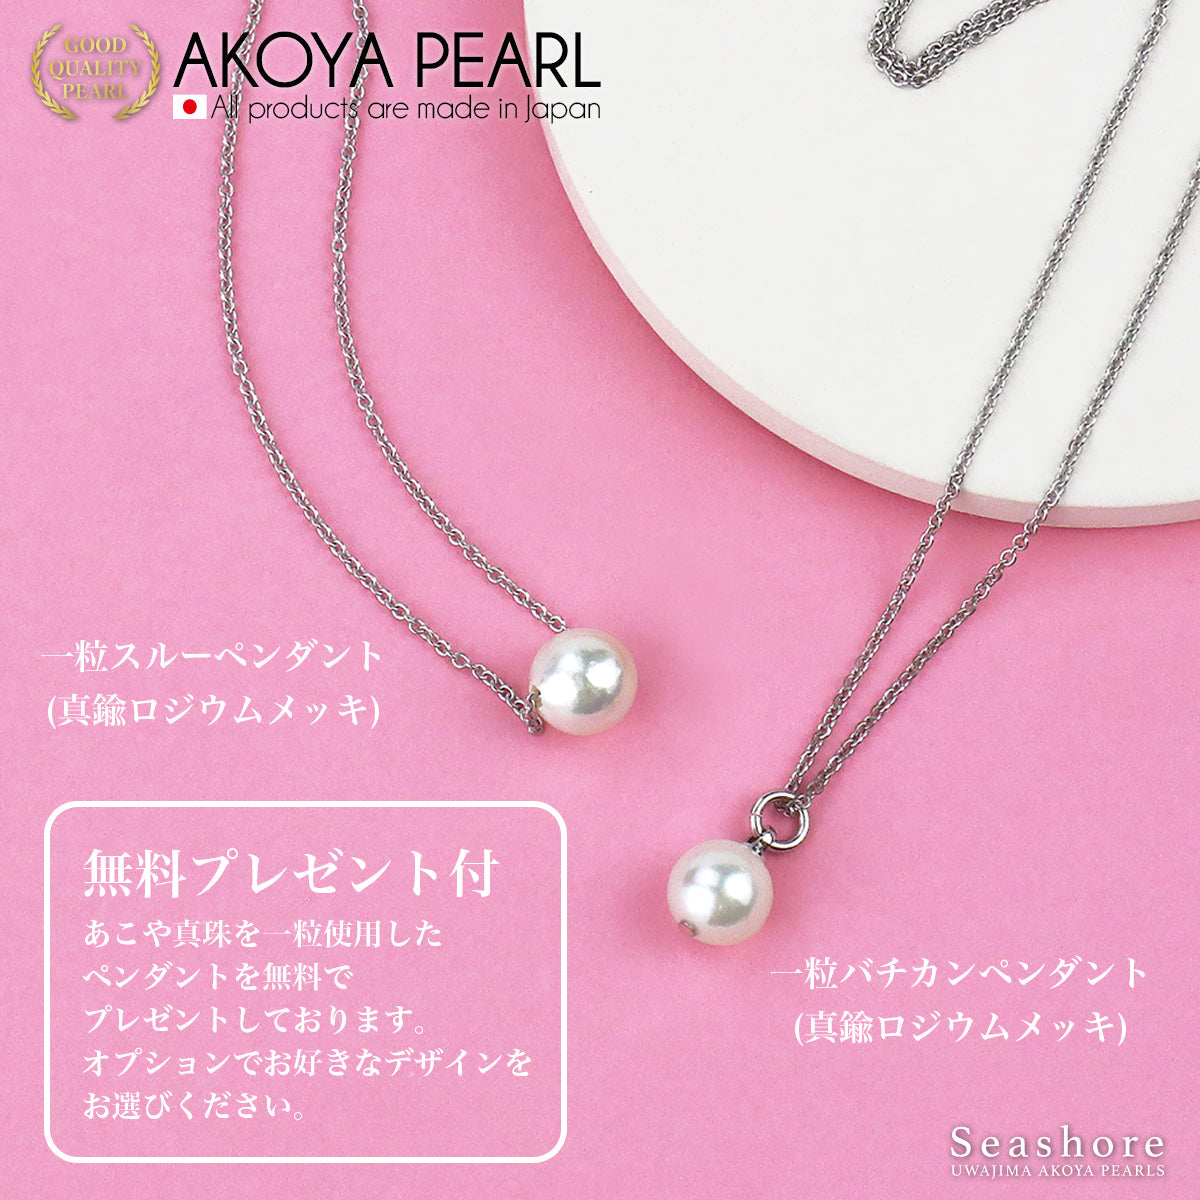 Uncolored Natural White Free Size Ring Akoya Pearl Semi-Baroque [8.0mmUP] SV925 Folk Ring Country of Origin Certificate Card Ring Case Included (4043)